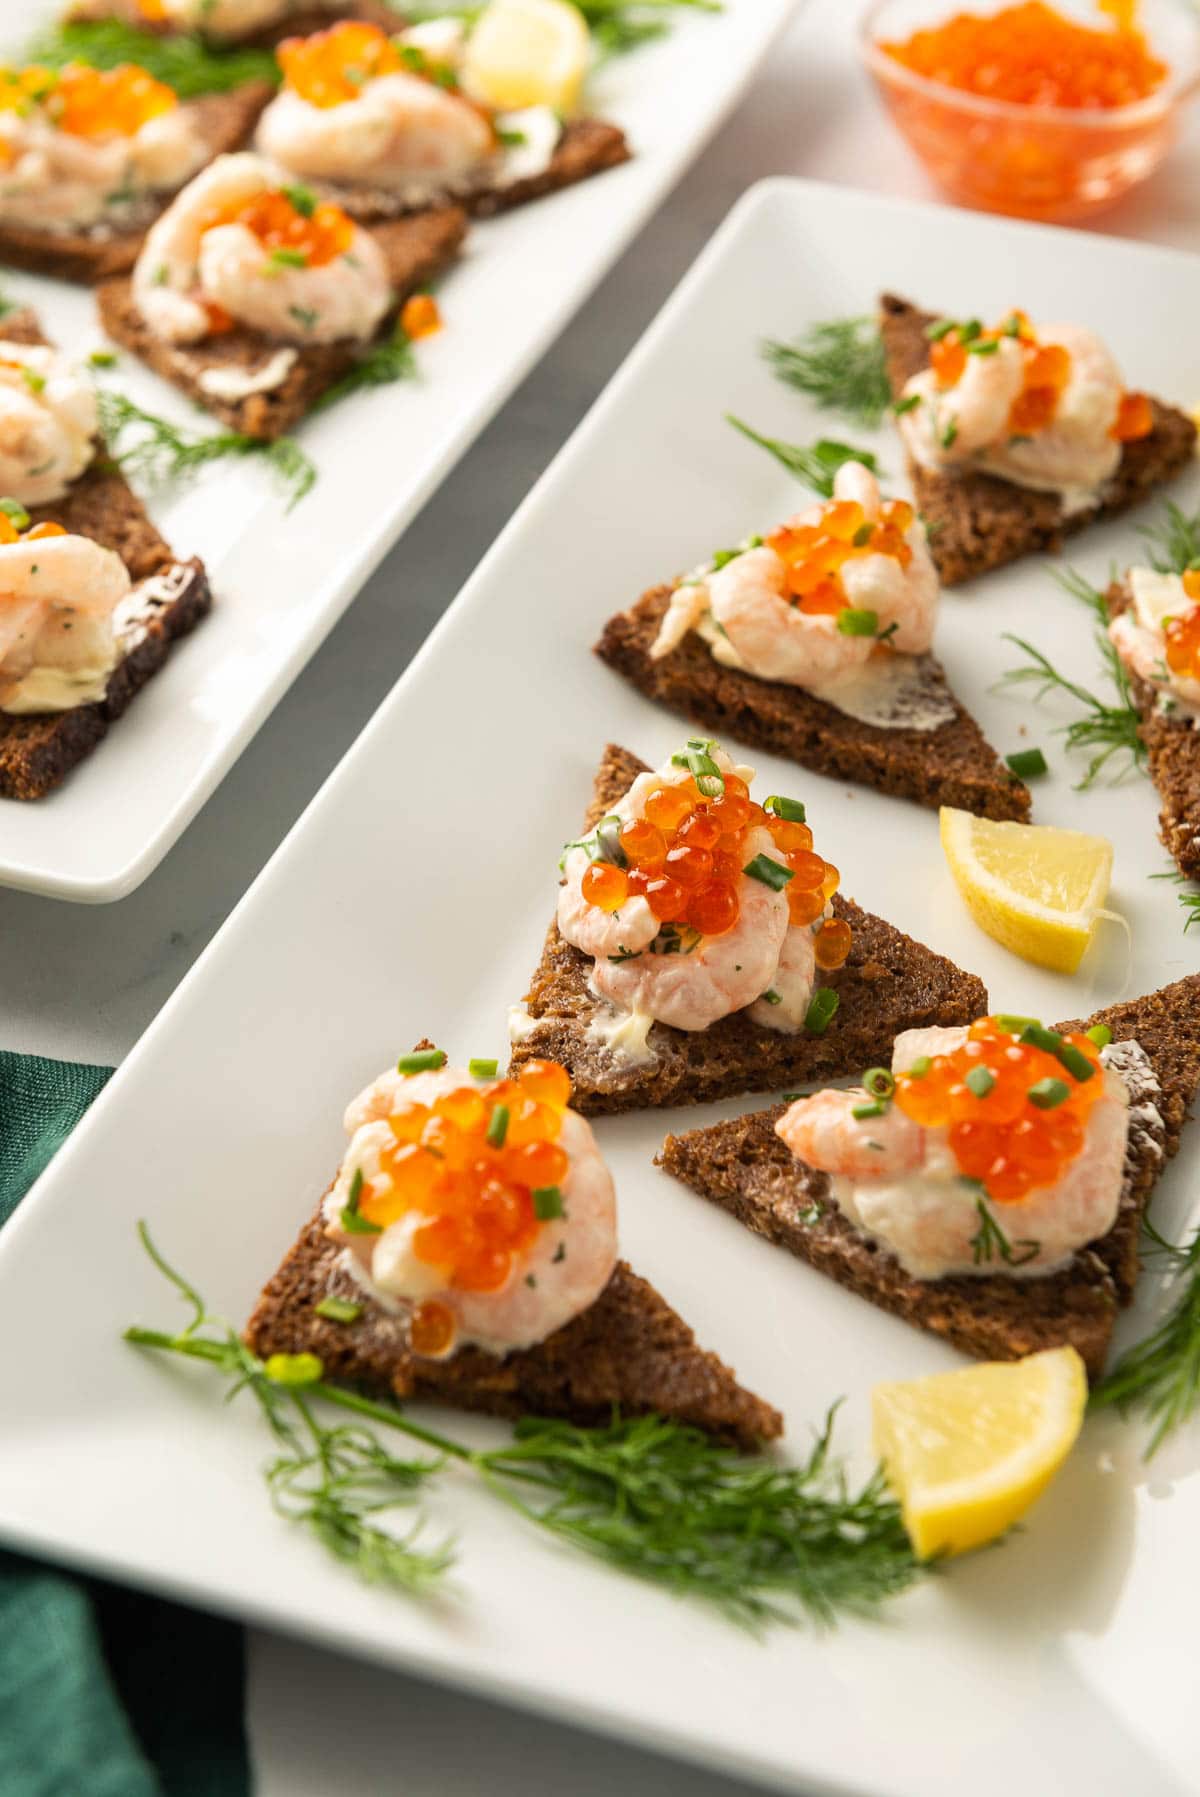 A platter of toast skagen triangles decorated with dill and lemon.